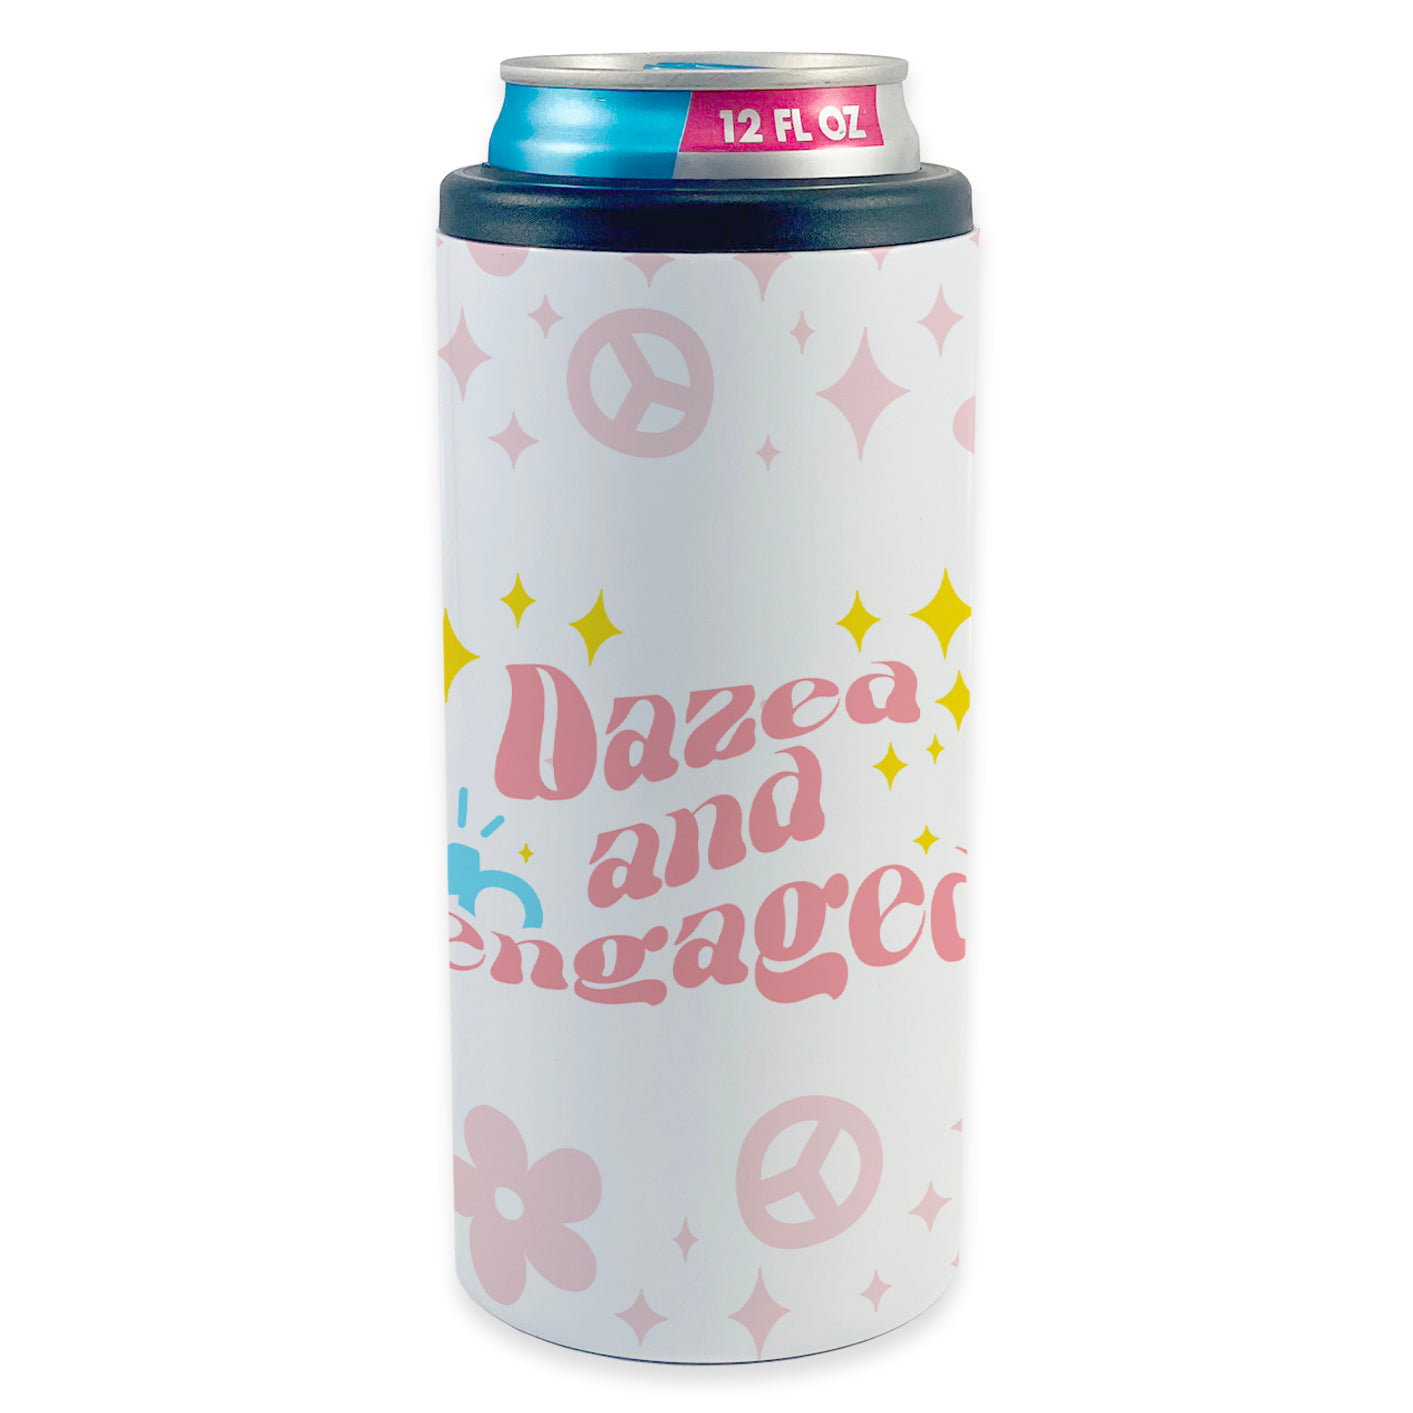 Bridal Party Collection (Dazed and Engaged) 12 oz Stainless Steel Slim Can Cooler